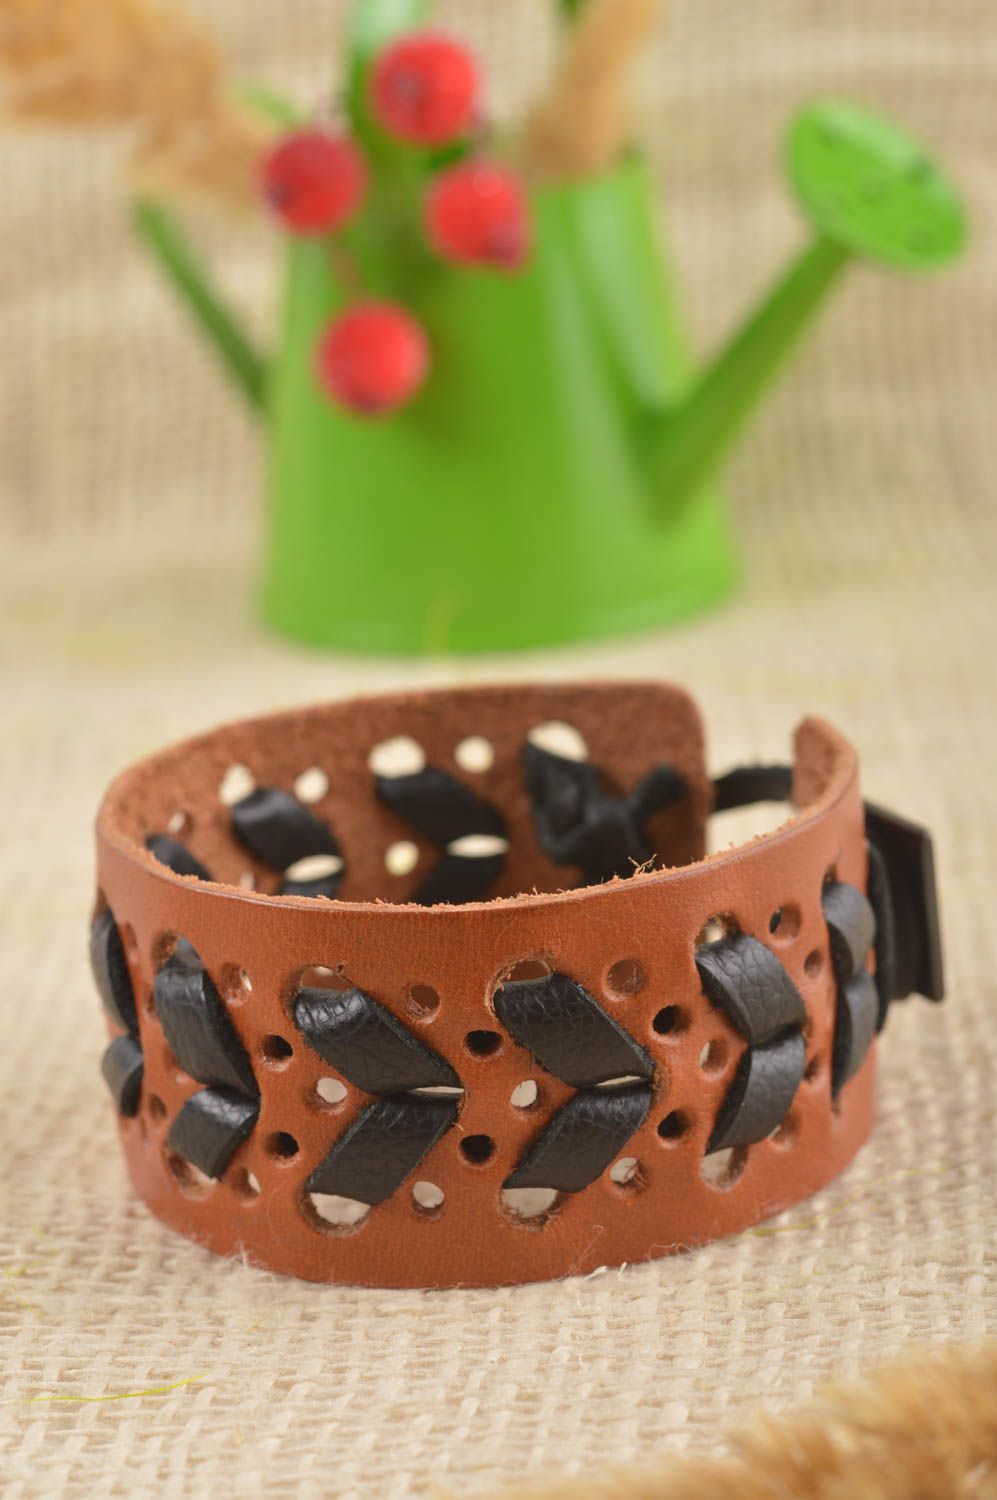 Beautiful handmade leather bracelet designs cool jewelry designs gifts for her photo 1